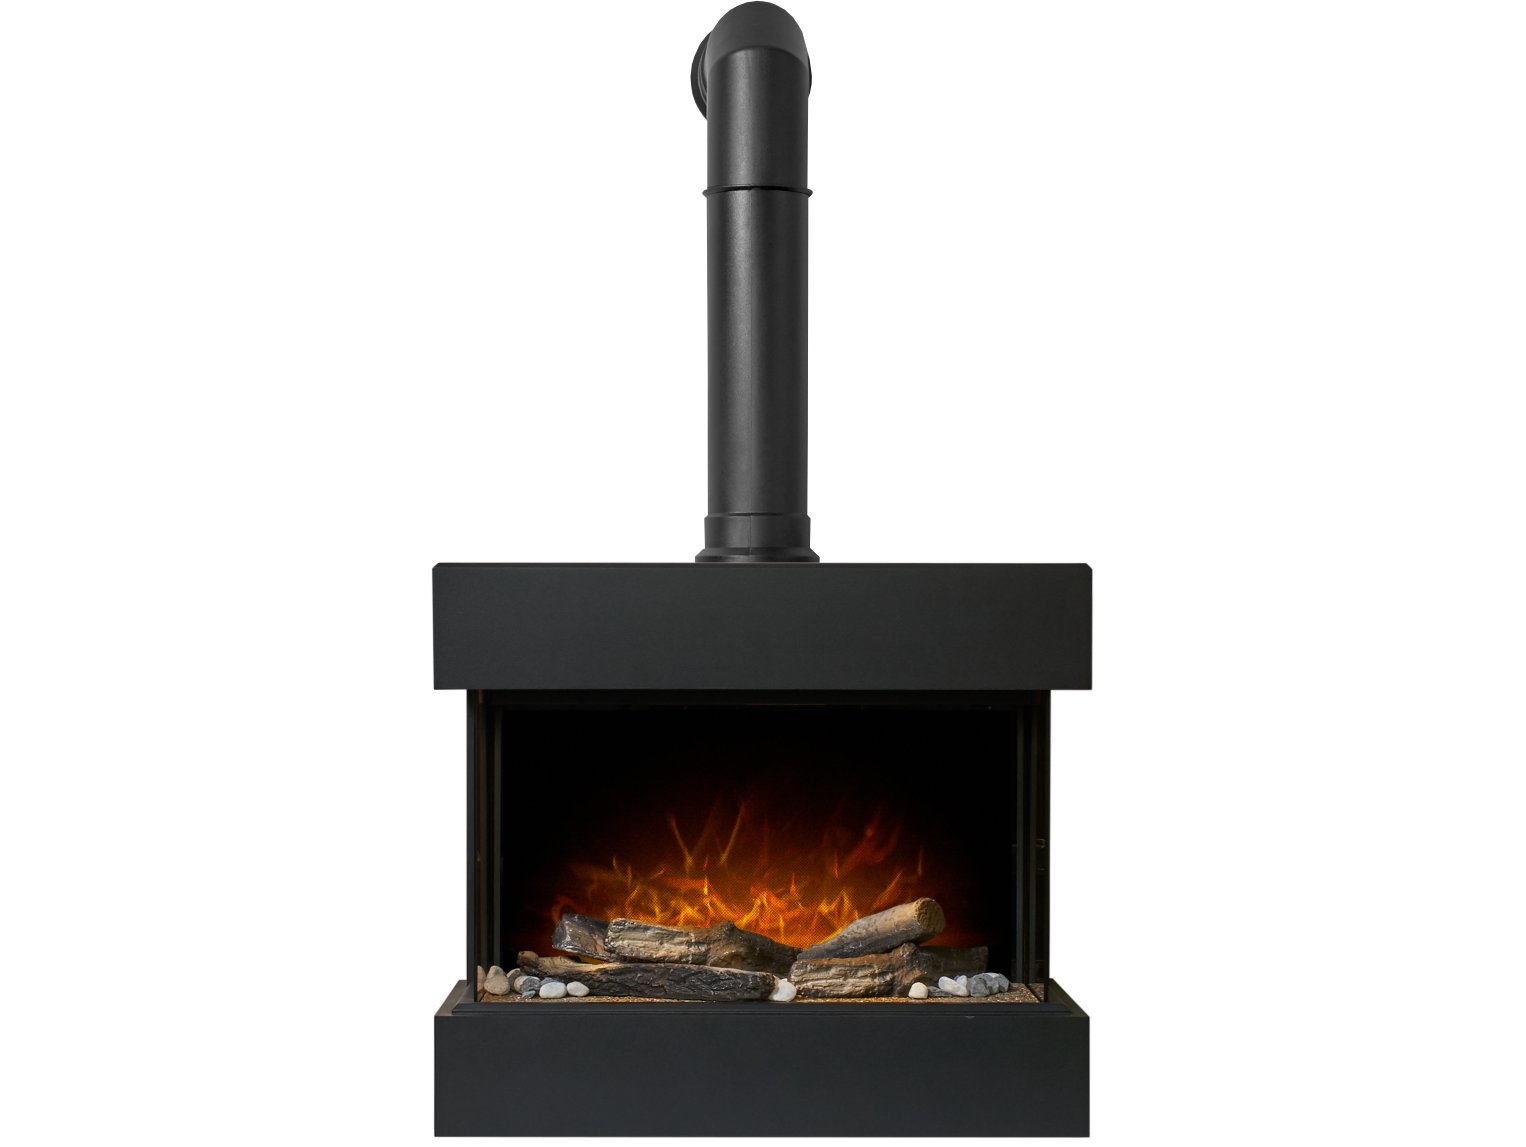 Adam Vega Electric Wall Mounted Fireplace Suite with Stove Pipe & Remote Control in Black